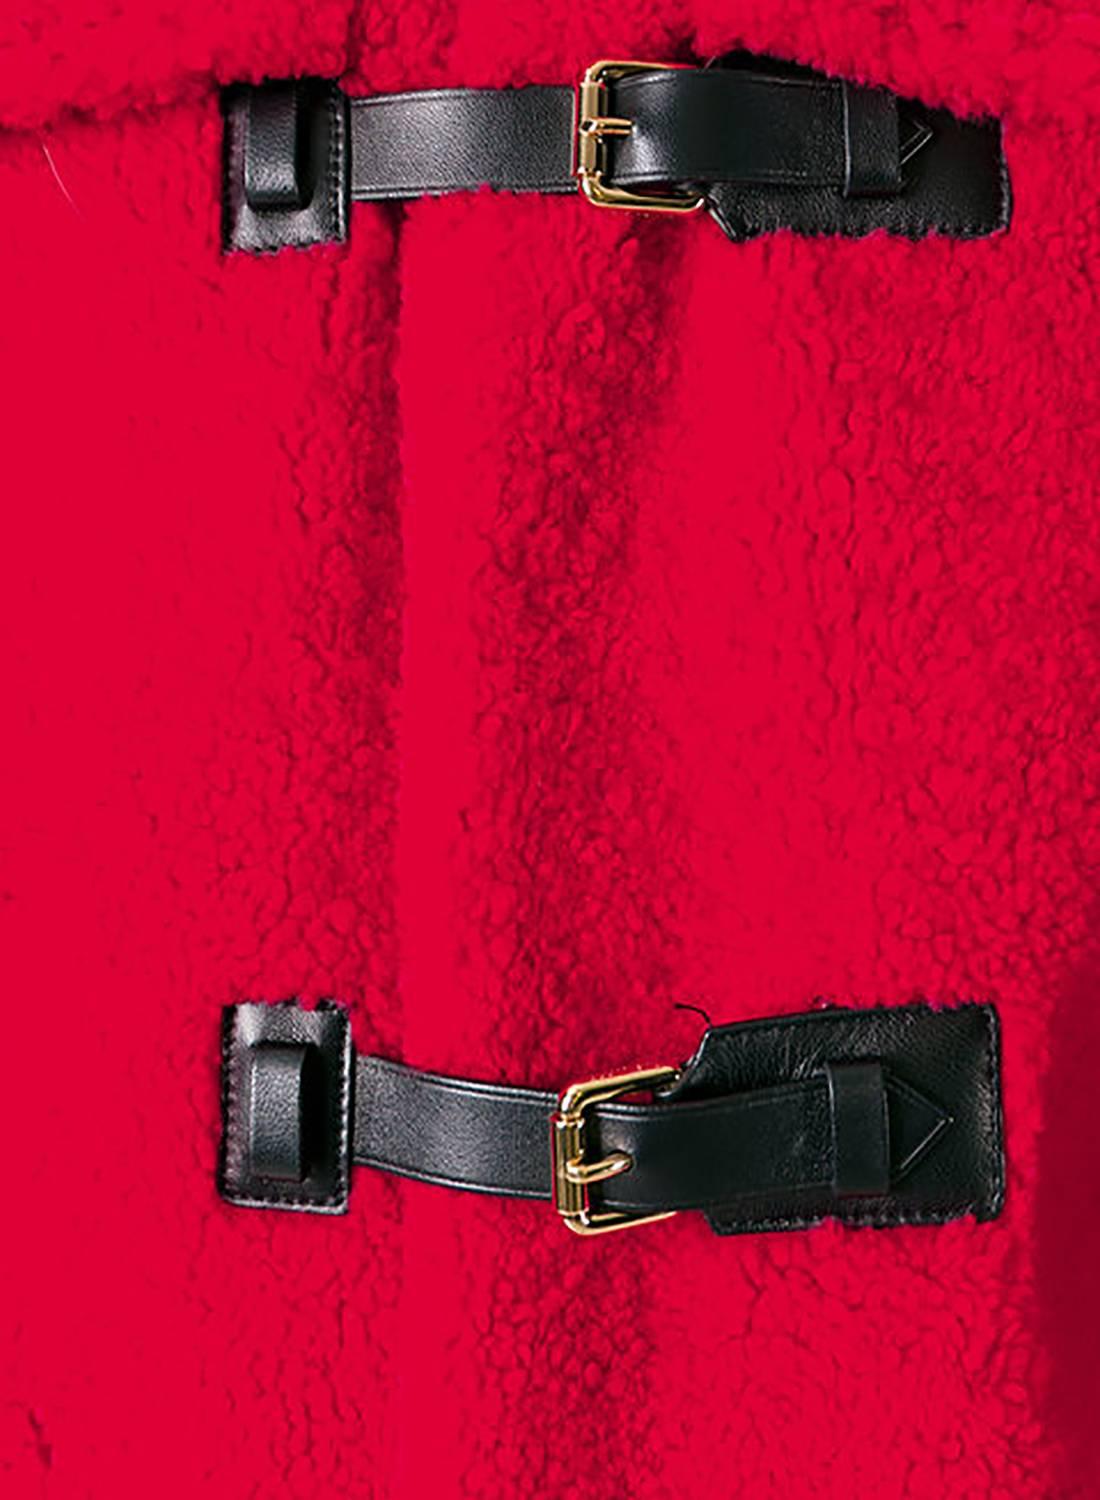 Be unforgettable in this bold Louis Vuitton coat, crafted from black leather and a vivid red shearling. Its oversized silhouette is finished with gold-tone buckle fastenings.

Colour: Black, red

Composition: Shearling, leather

Size: 40